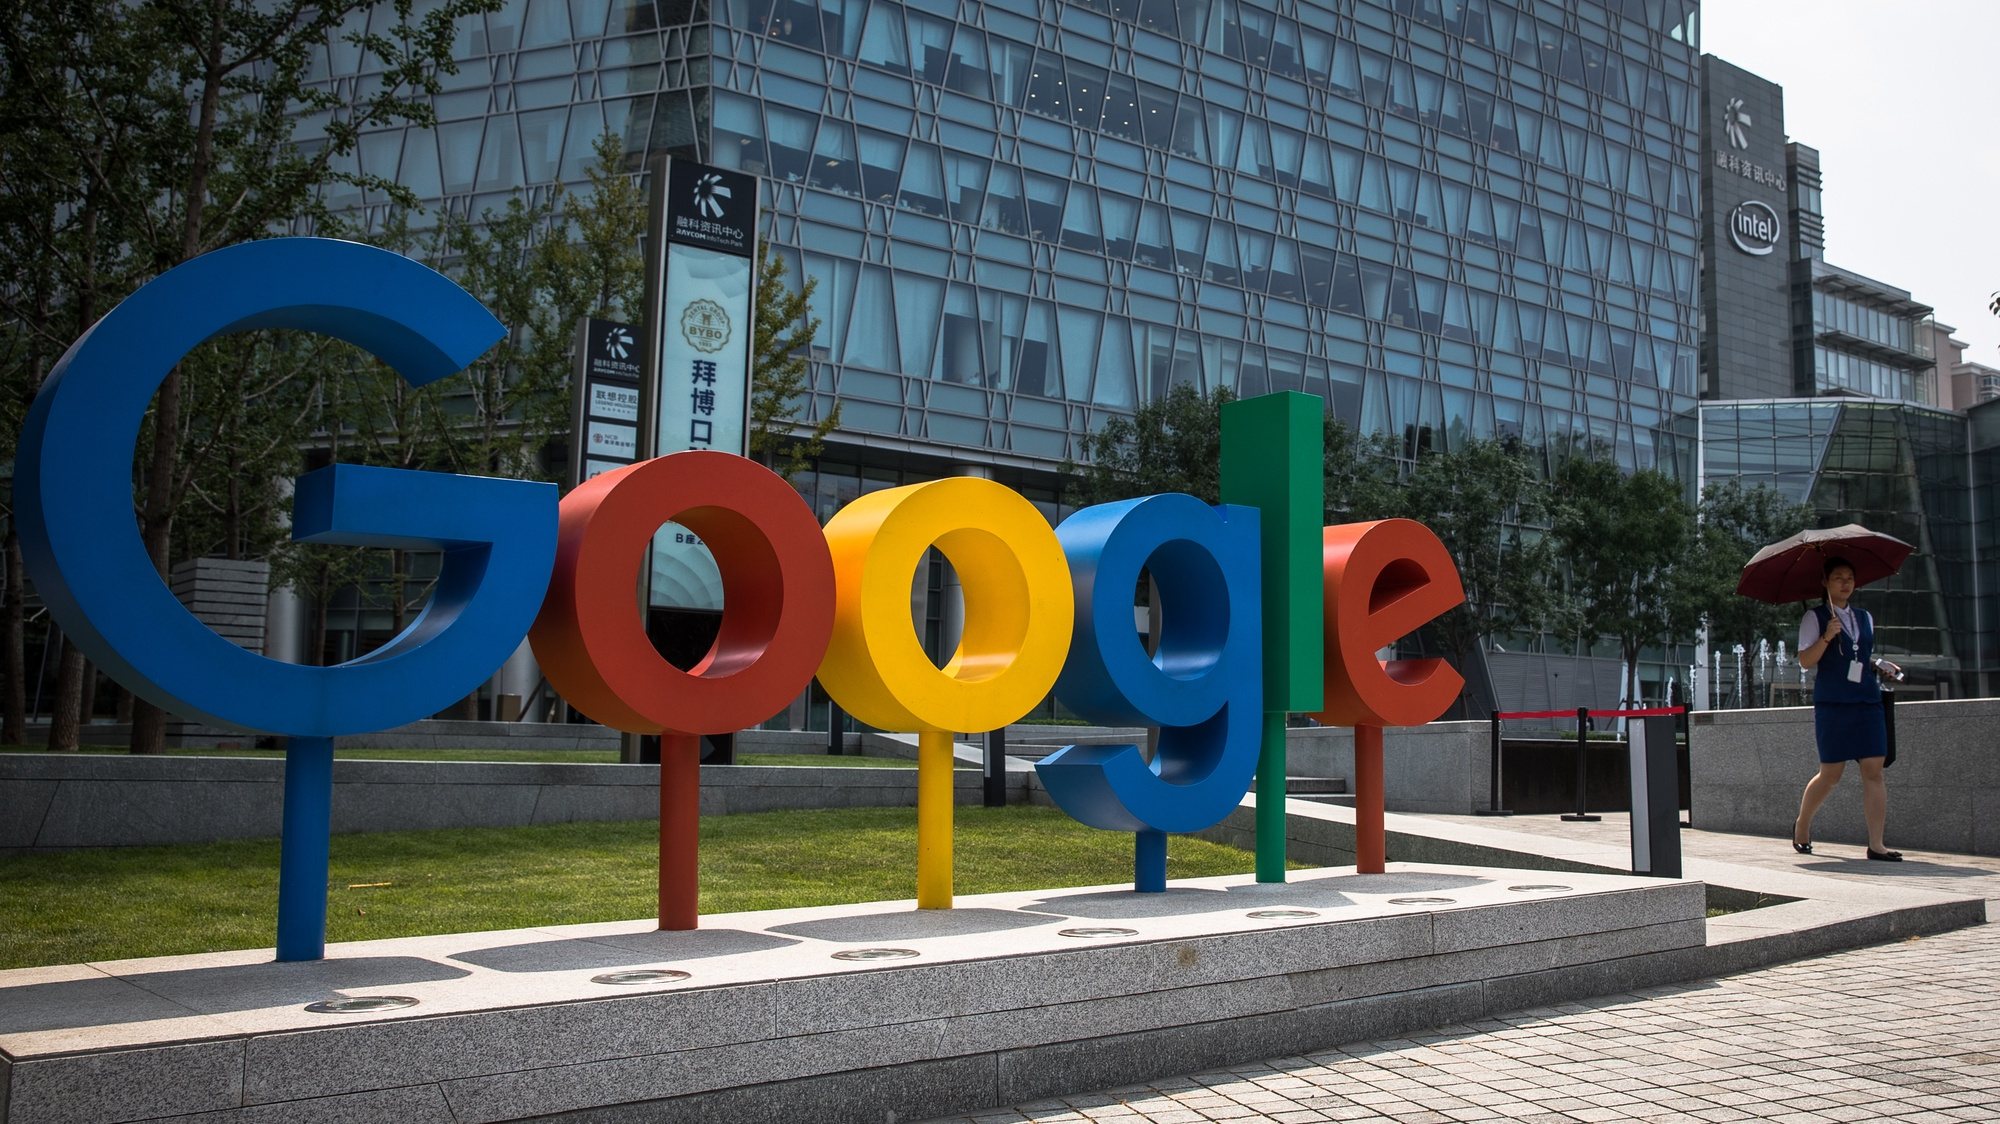 epa08873749 (FILE)  A Chinese woman walks next to a &#039;Google&#039; brand name and logo, near the Google office in Beijing, China, 03 August 2018 (reissued 10 December 2020). According to media reports on 10 December 2020, French data privacy regulator CNIL will impose over 100 million euros fines on US companies Google and Amazon for breaching EU privacy data rules. According to media reports, Google will have to pay 100 million euros and Amazon 35 million euros fines.  EPA/ROMAN PILIPEY *** Local Caption *** 55208312